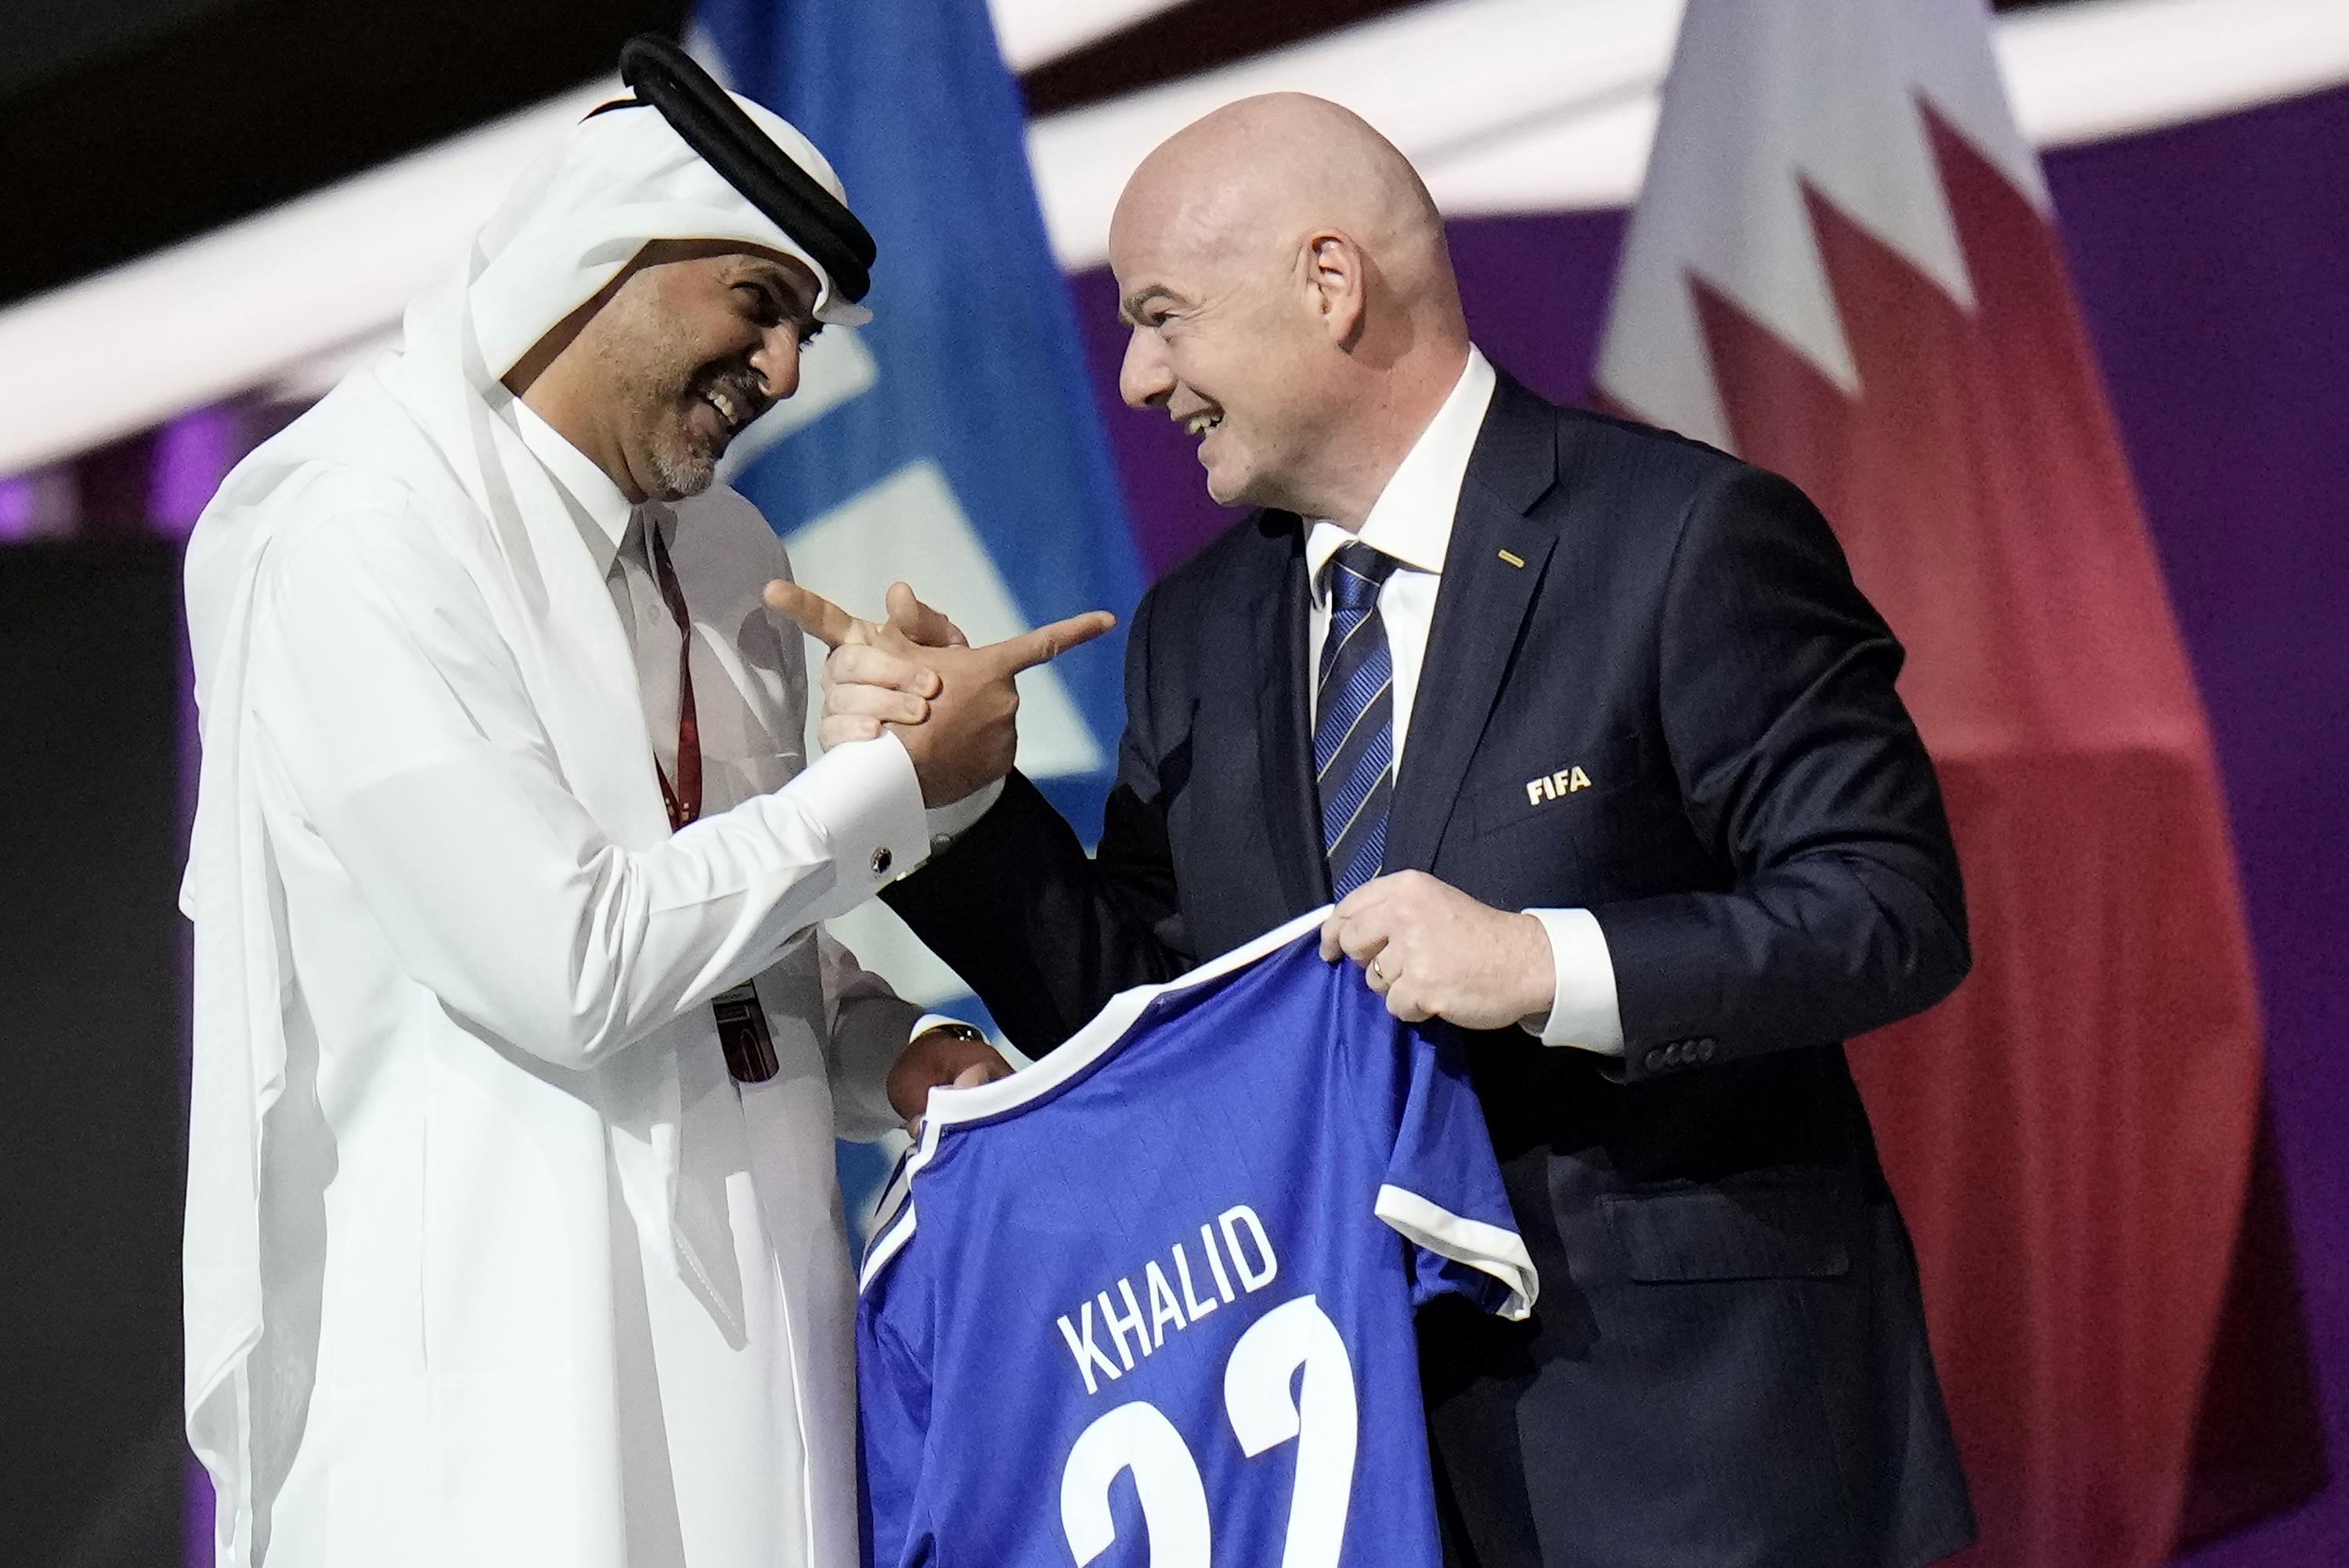 Culture clash? Conservative Qatar preps for World Cup party